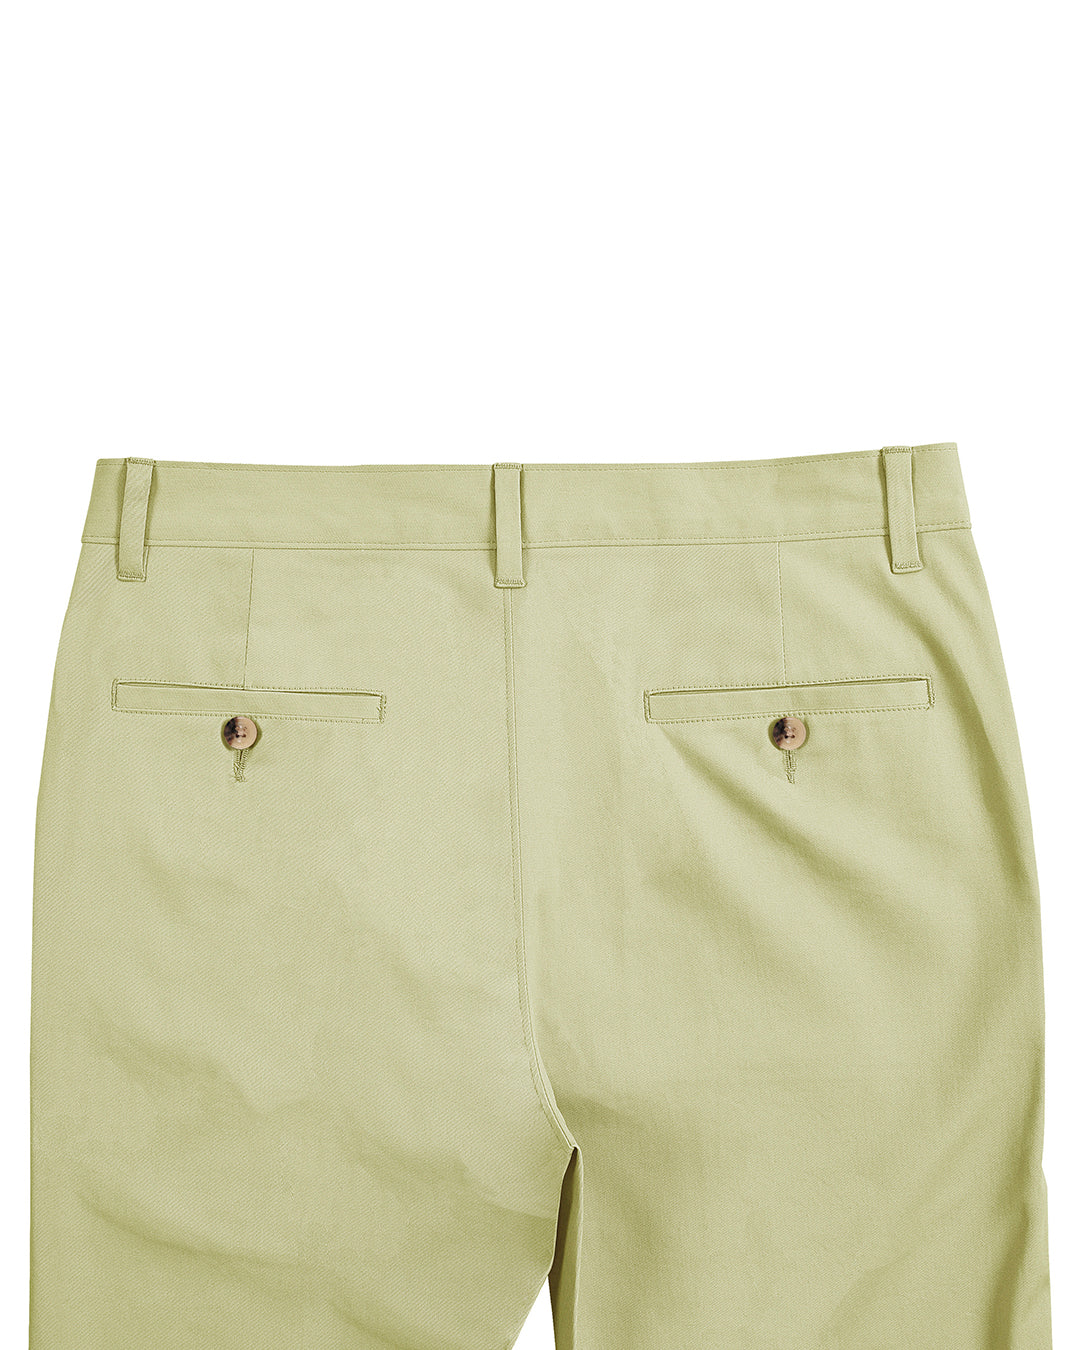 Back view of custom Genoa Chino pants for men by Luxire in pale lime